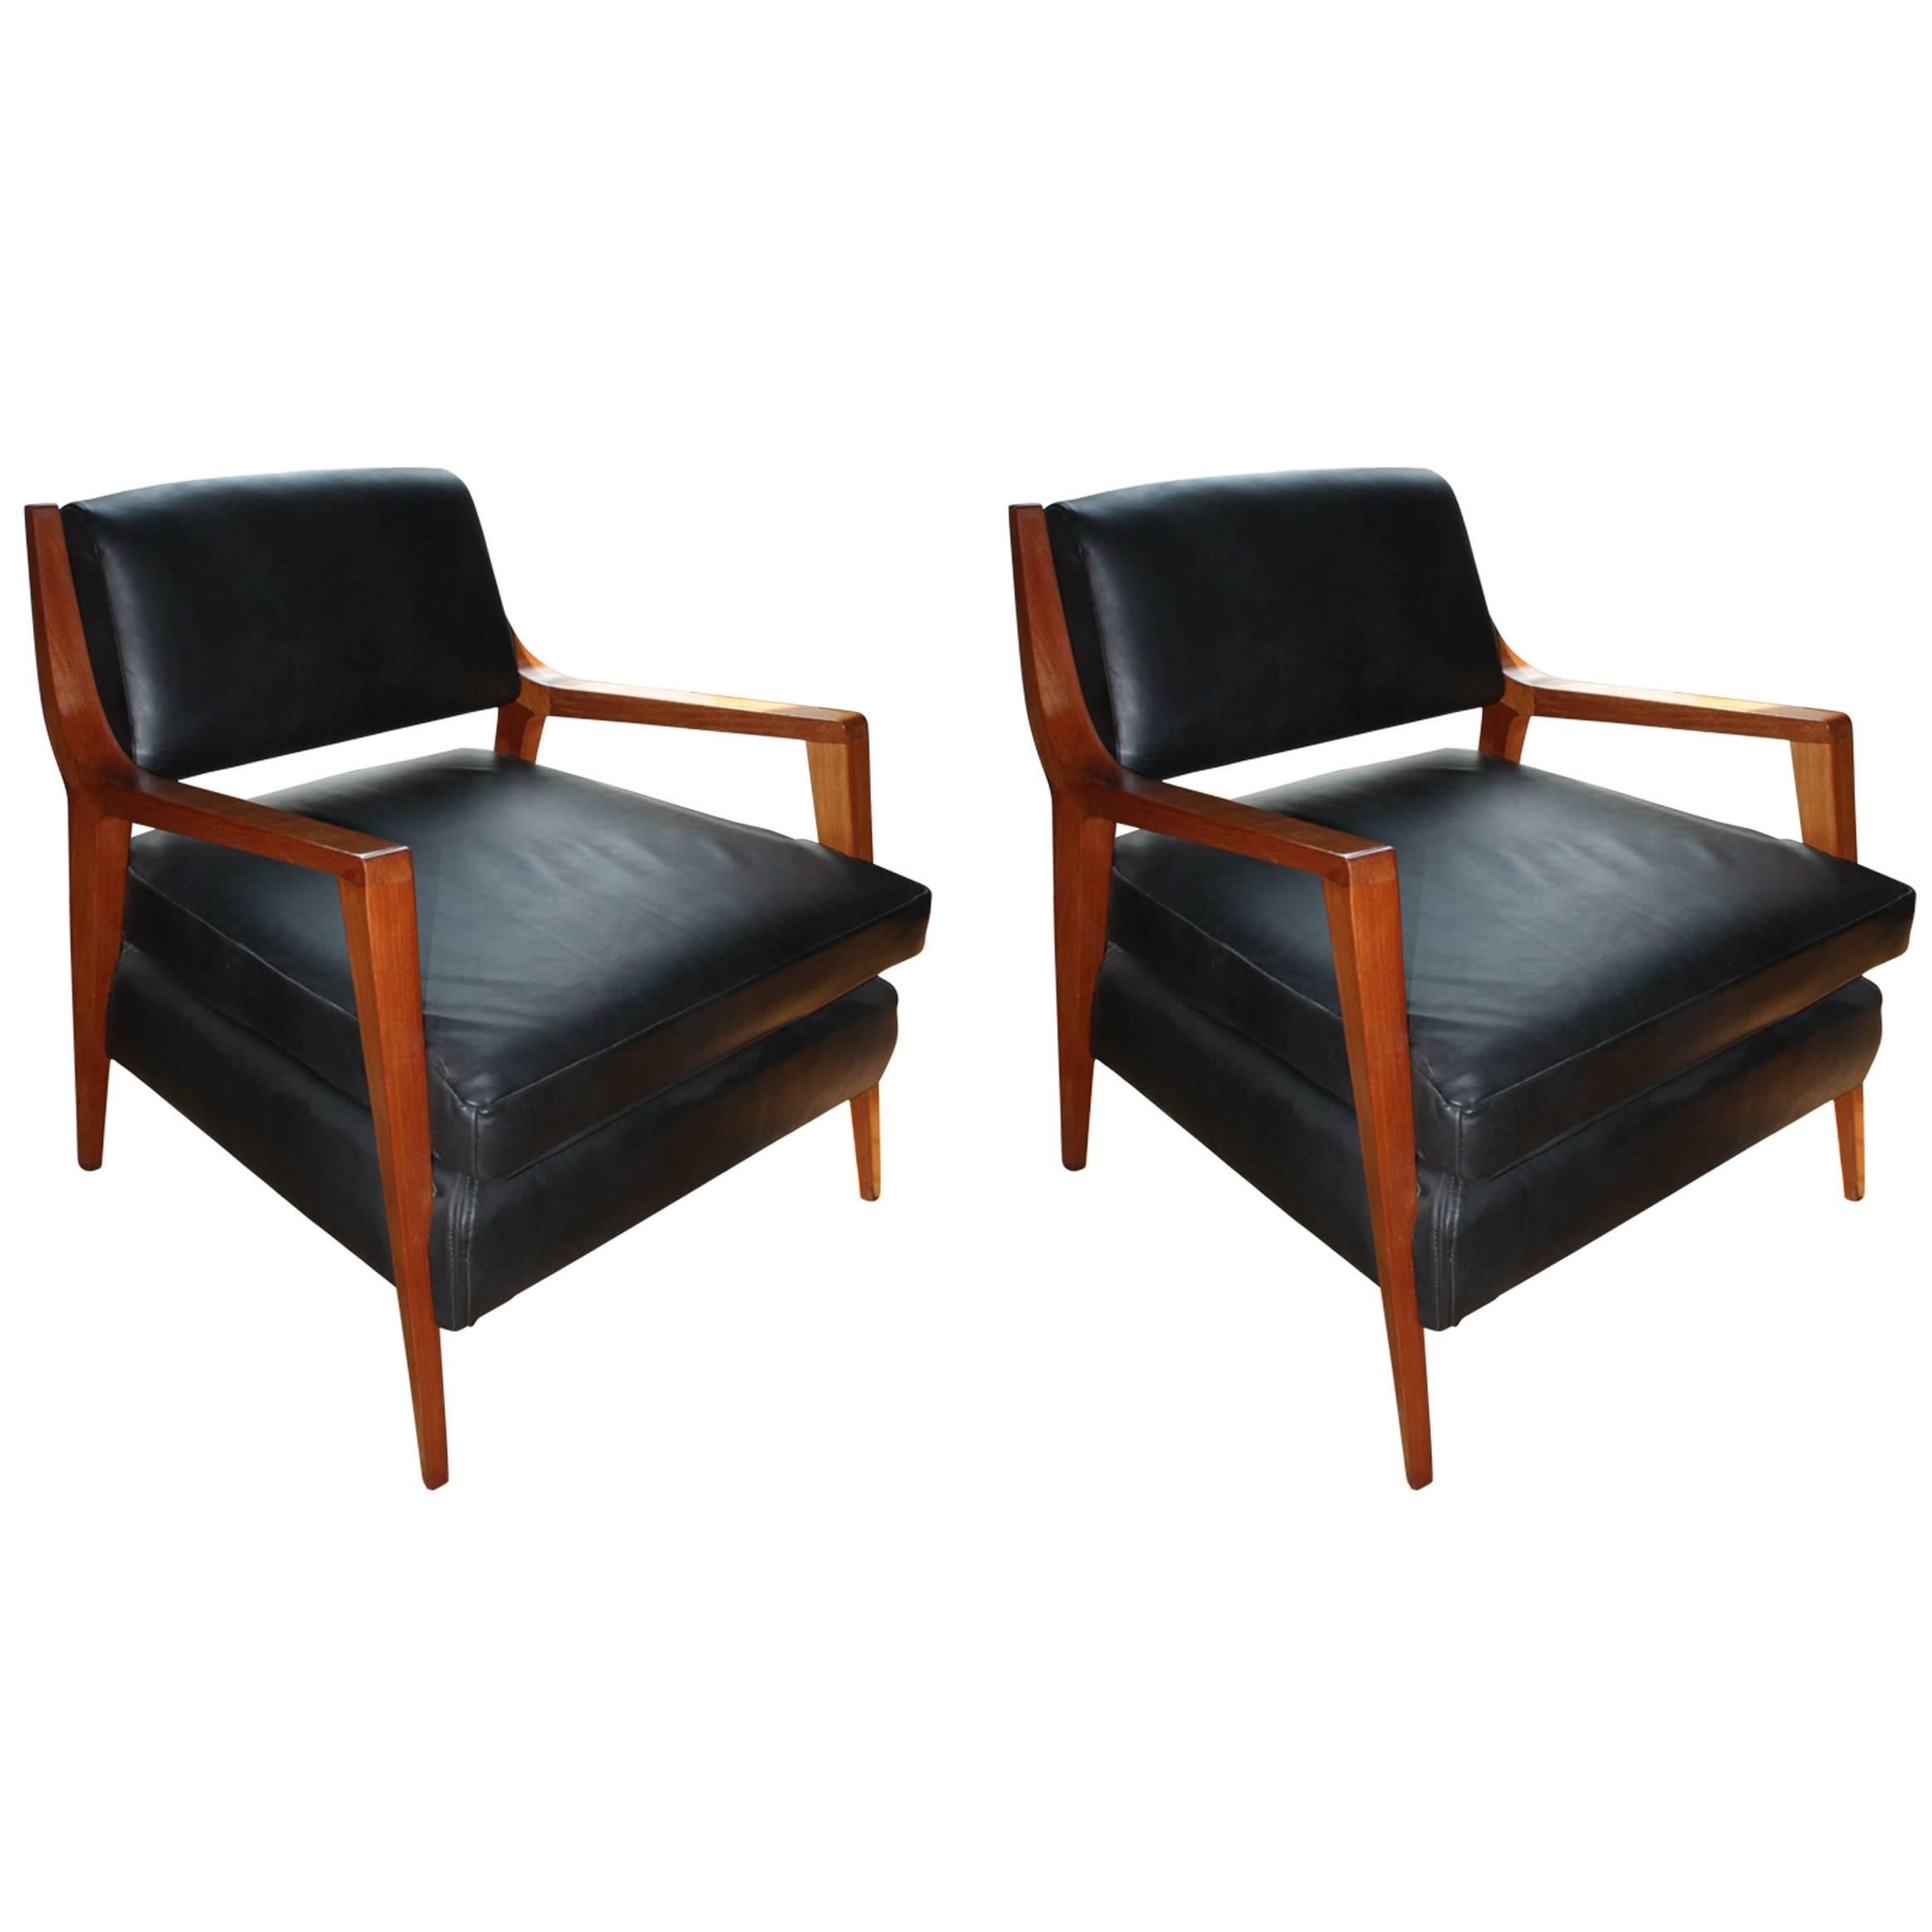 Pair of Van Beuren Chairs of Mahogany Wood with Black Leather Seats For Sale